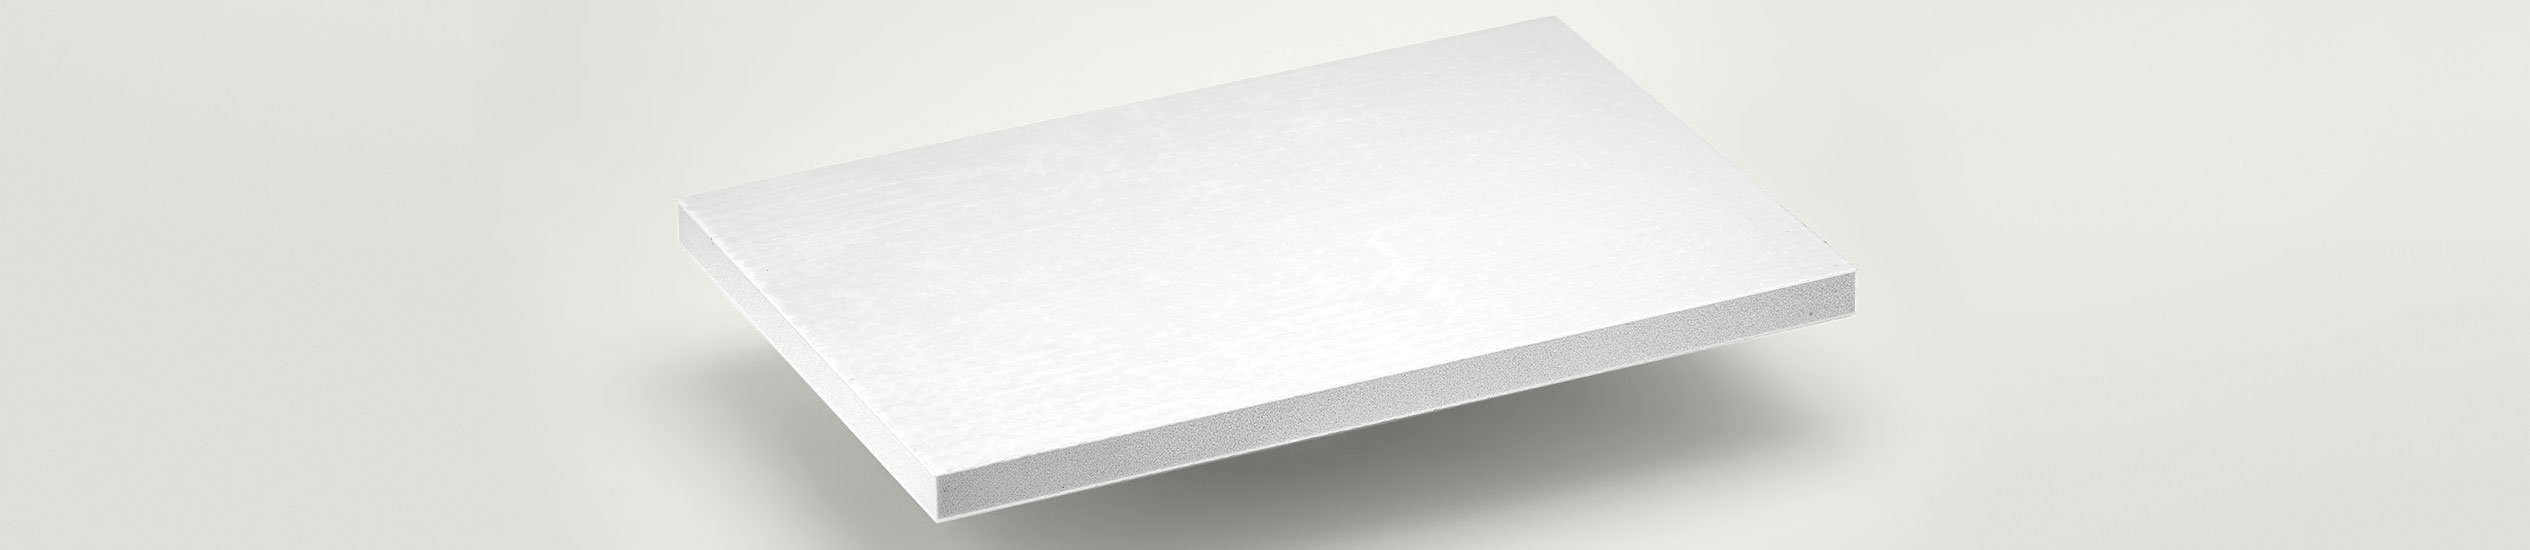 Clearpet is a lightweight sandwich panel with a core in PET foam with glass fibre reinforced with epoxy resin.